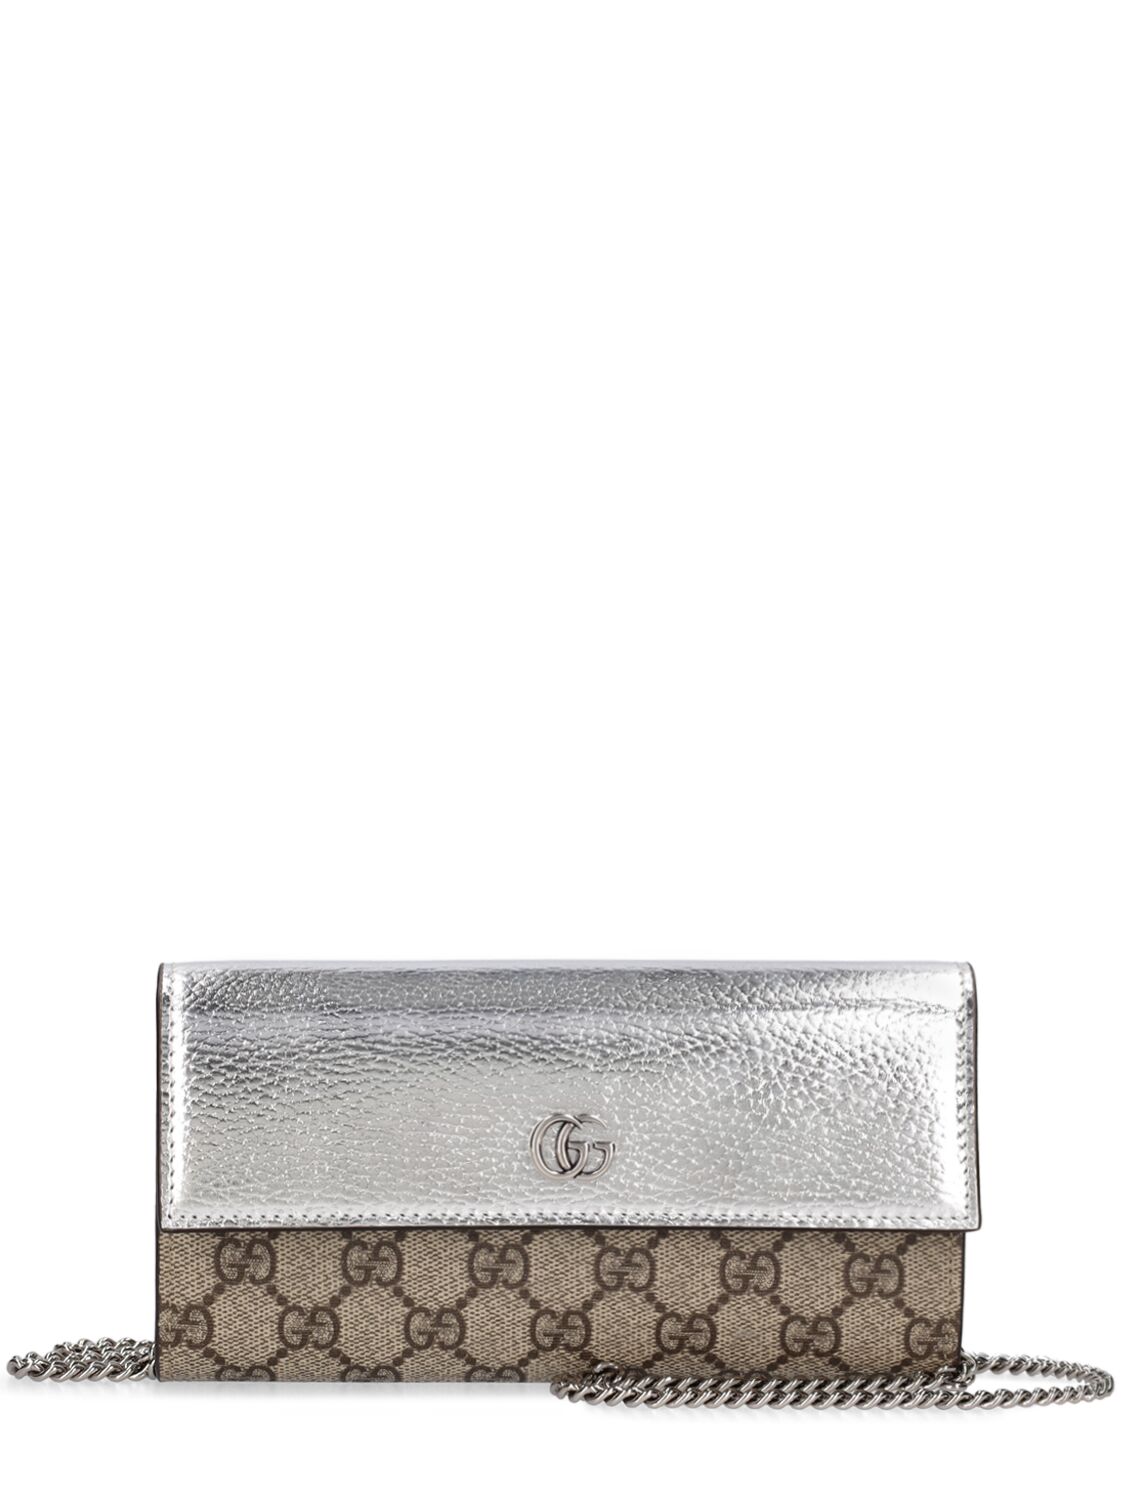 Image of Gg Marmont Leather & Canvas Chain Wallet